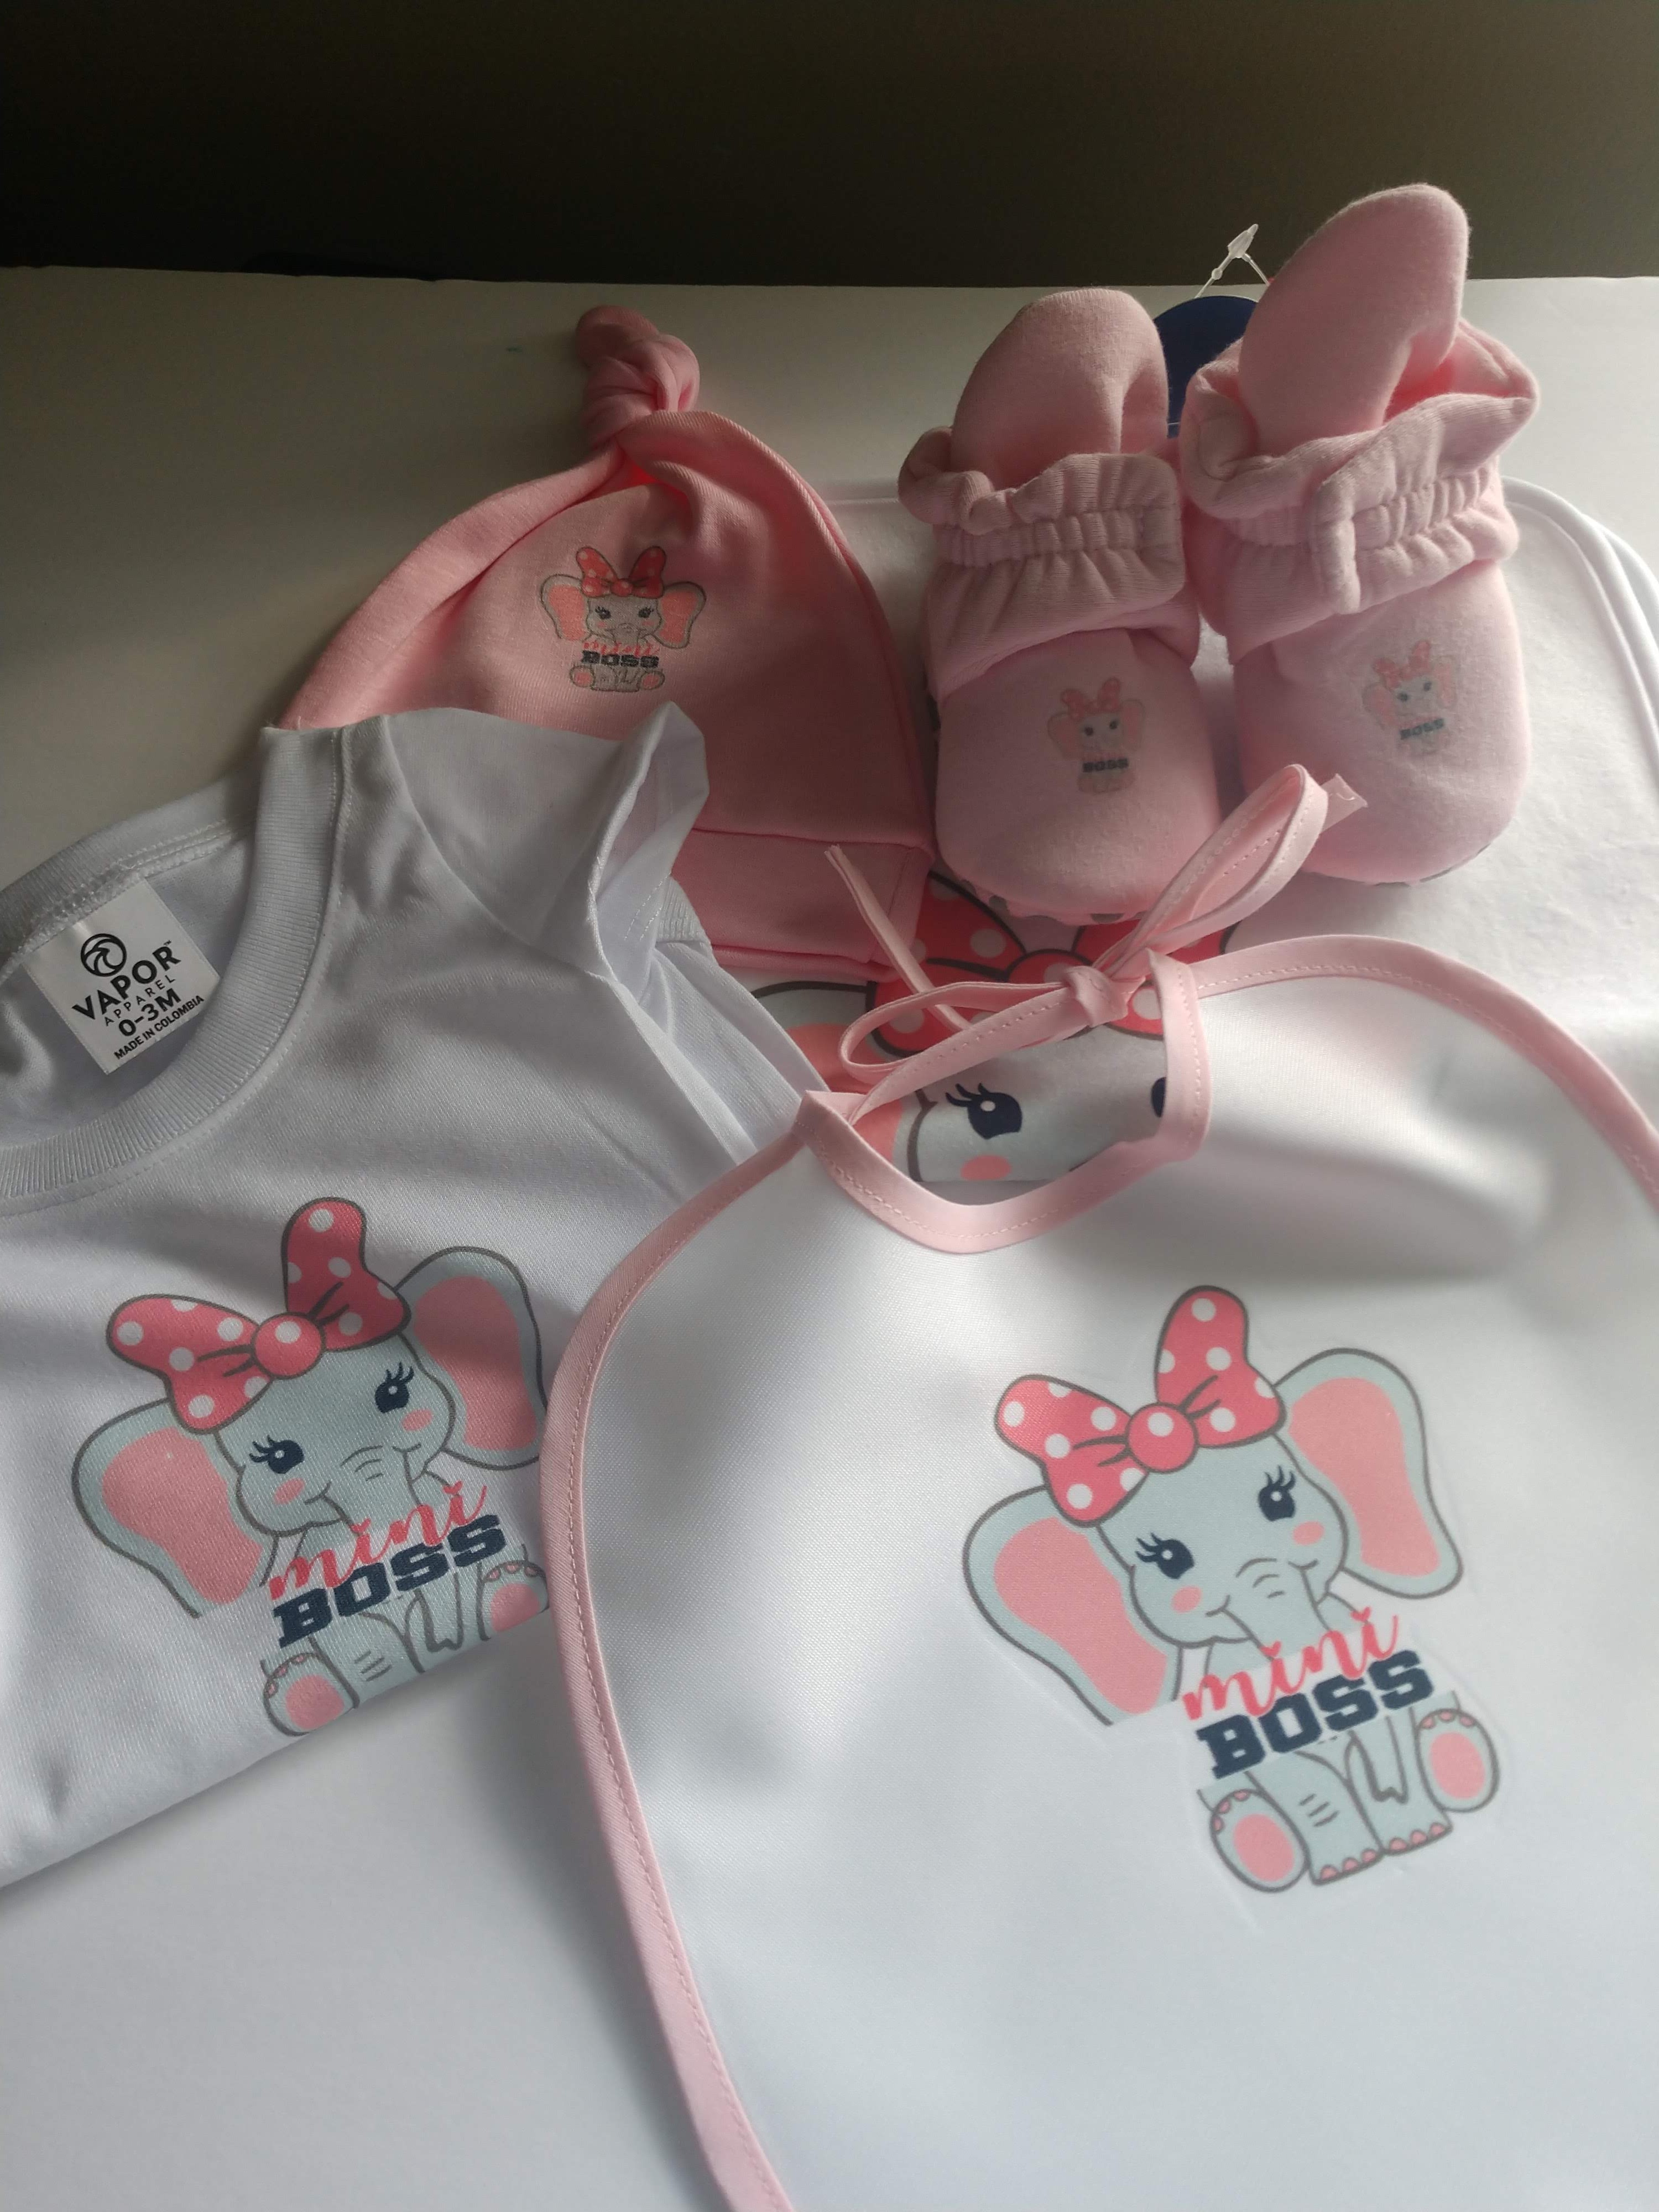 Baby shower gift made with sublimation printing